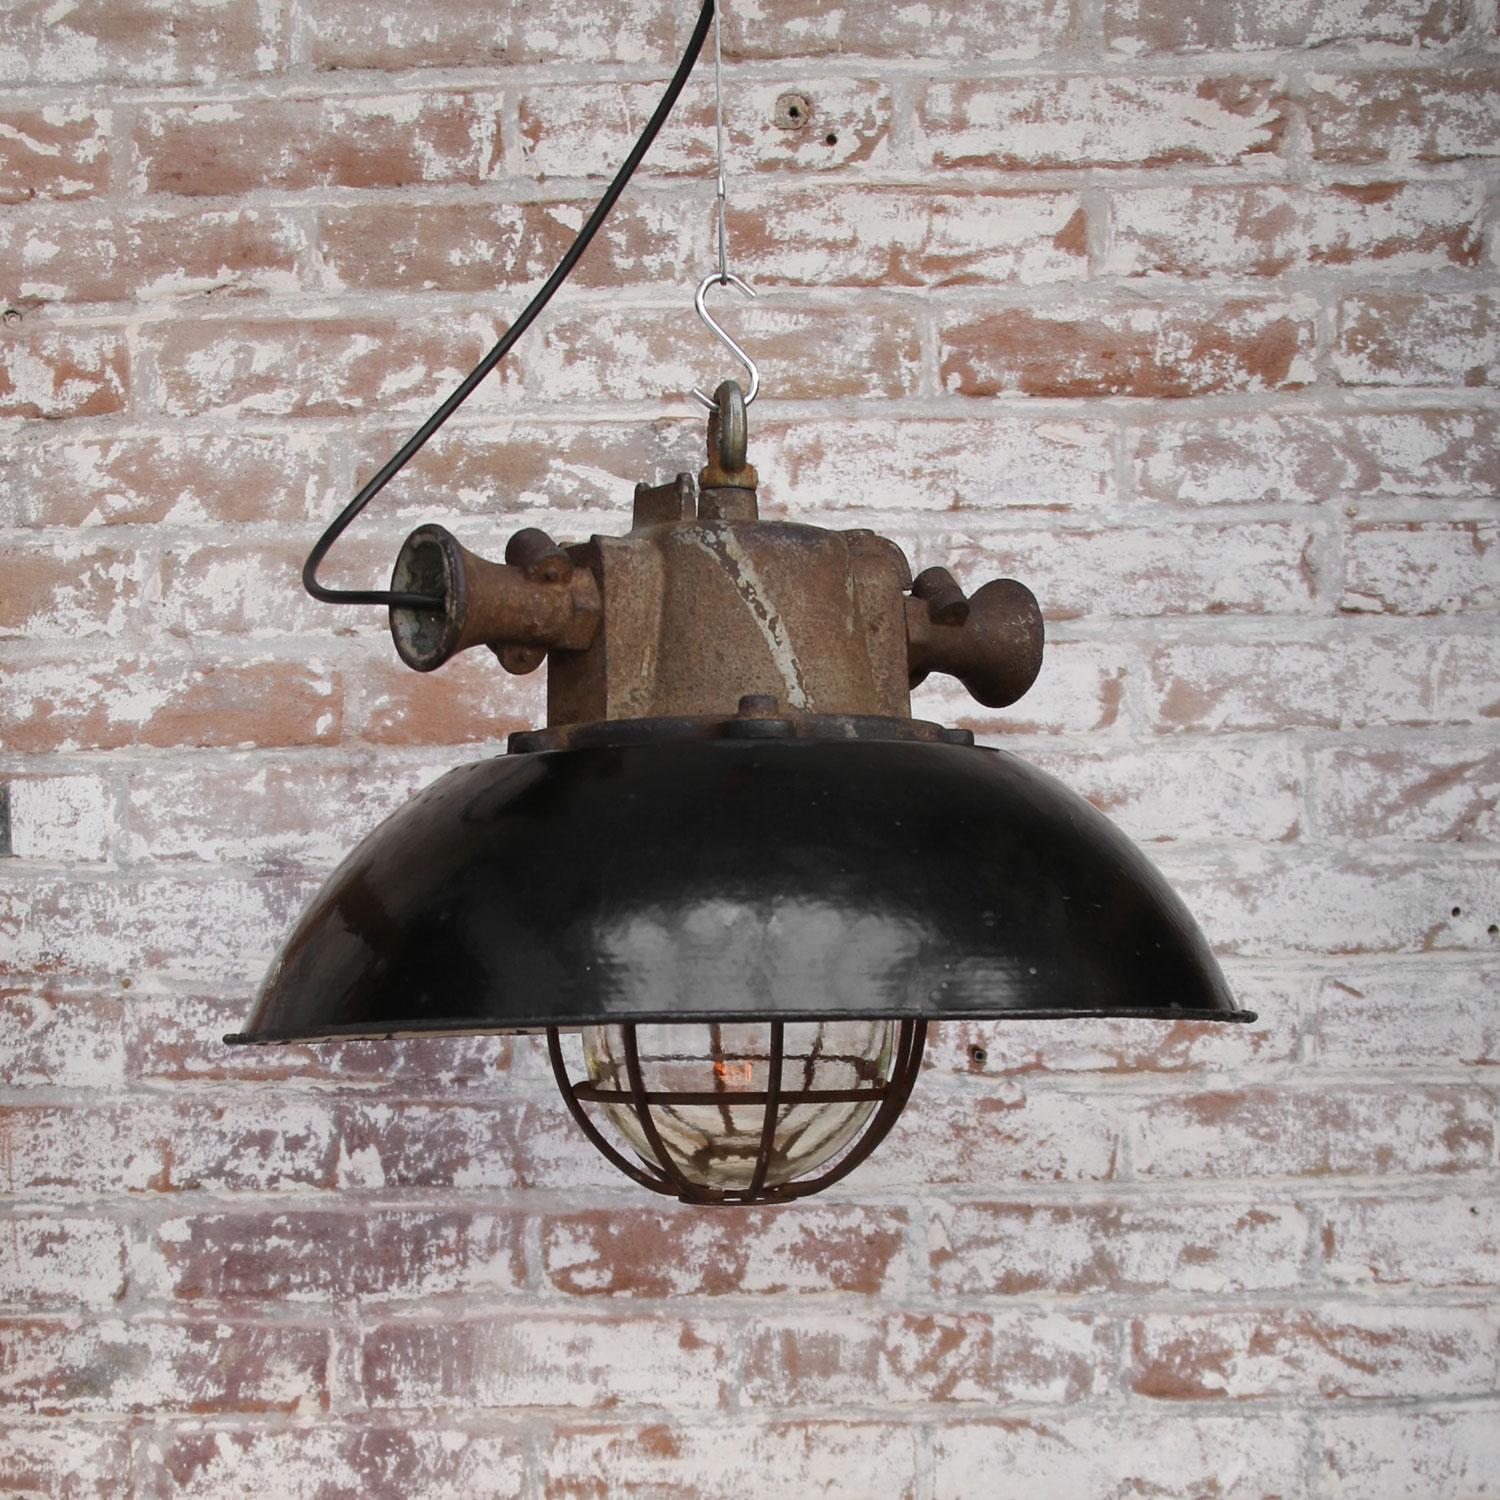 Black Enamel Cast Iron Vintage Industrial Cage Pendant Lights In Good Condition For Sale In Amsterdam, NL